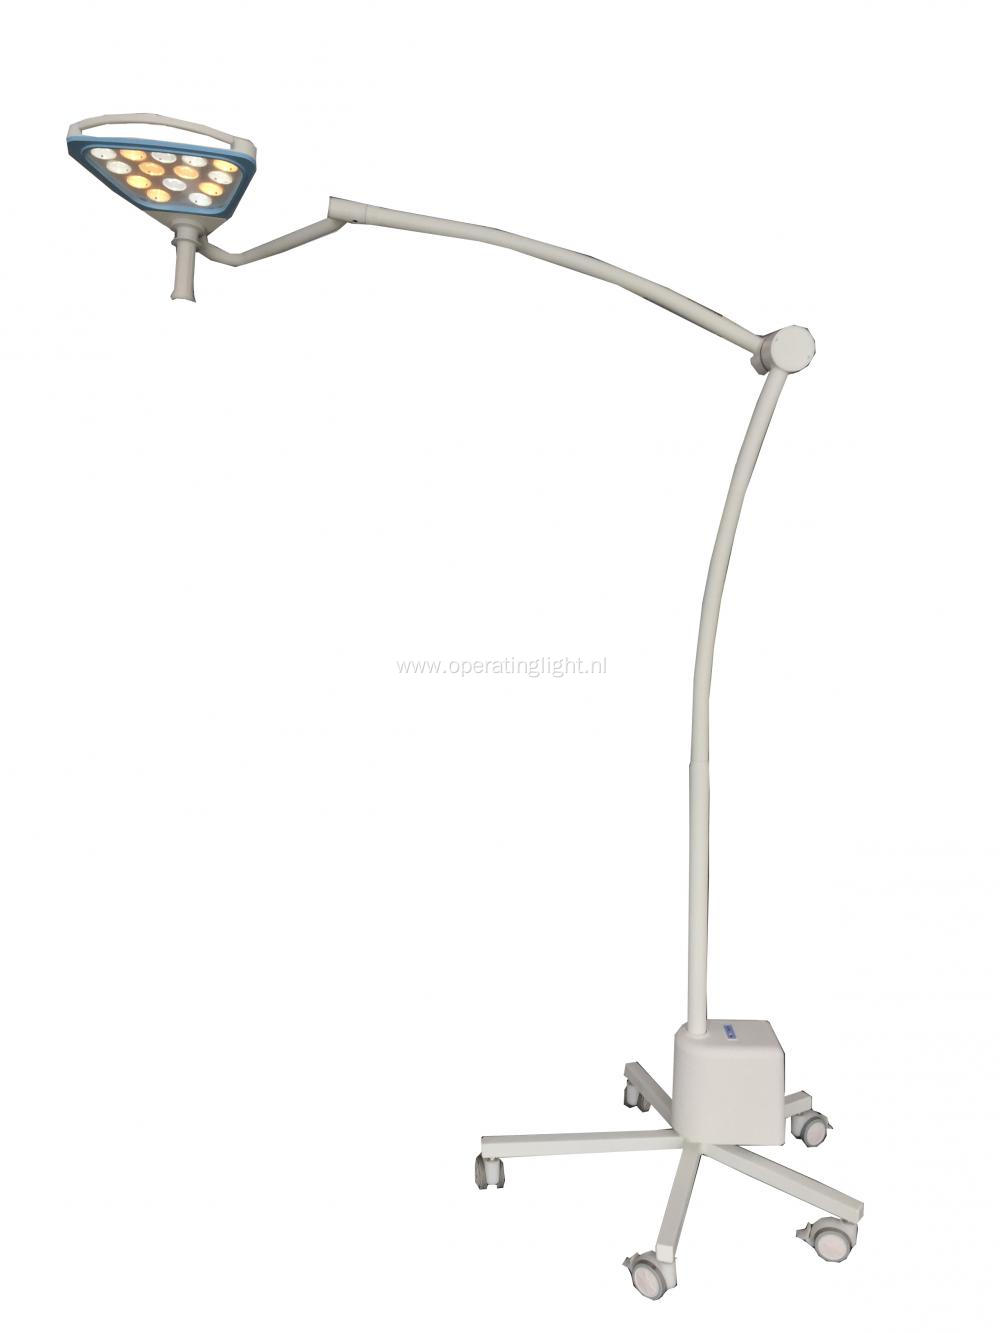 Mobile type led medical device lamp